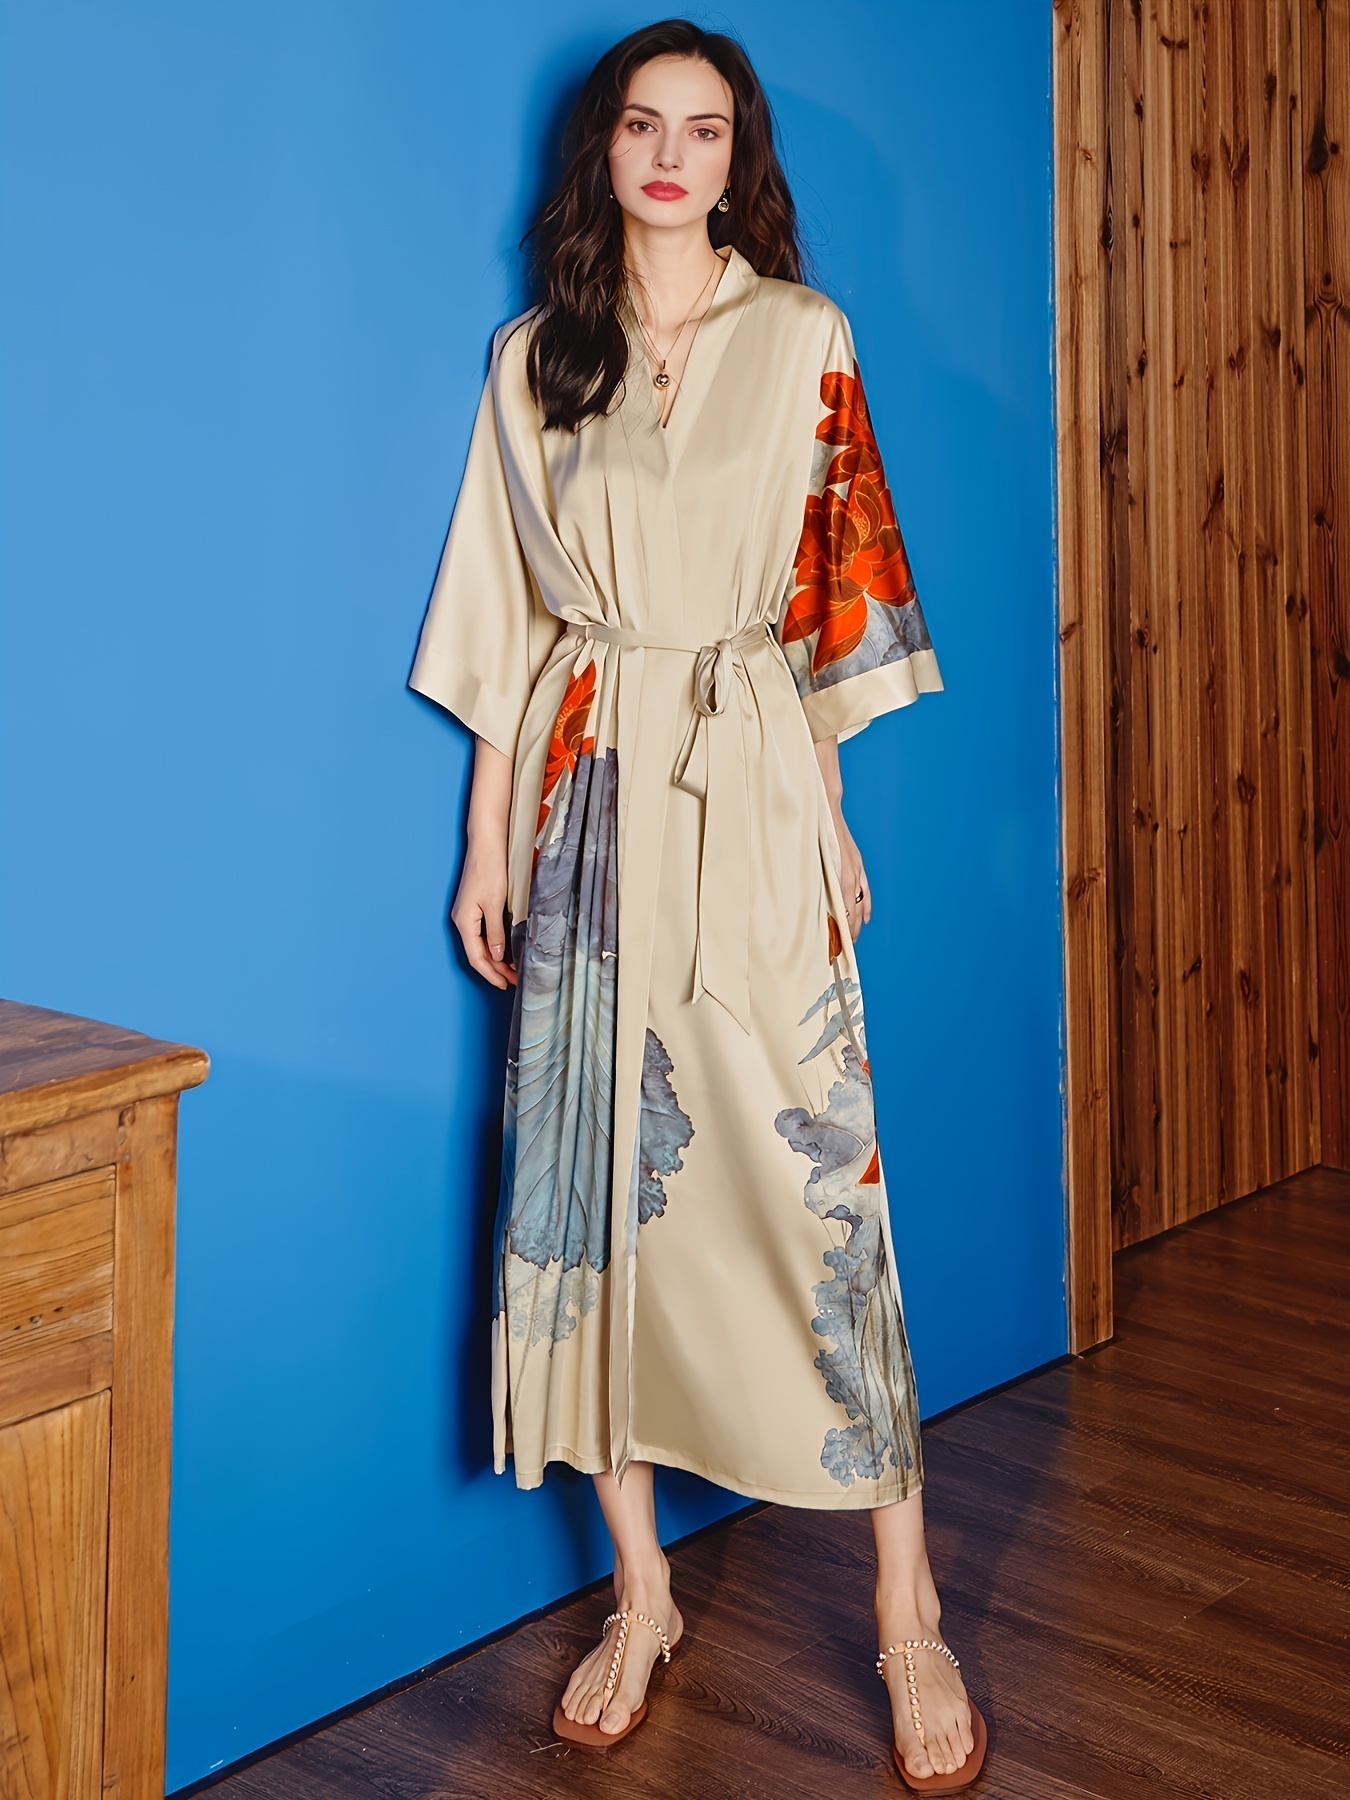 Women's Floral Kimono Robes & Dressing Gowns